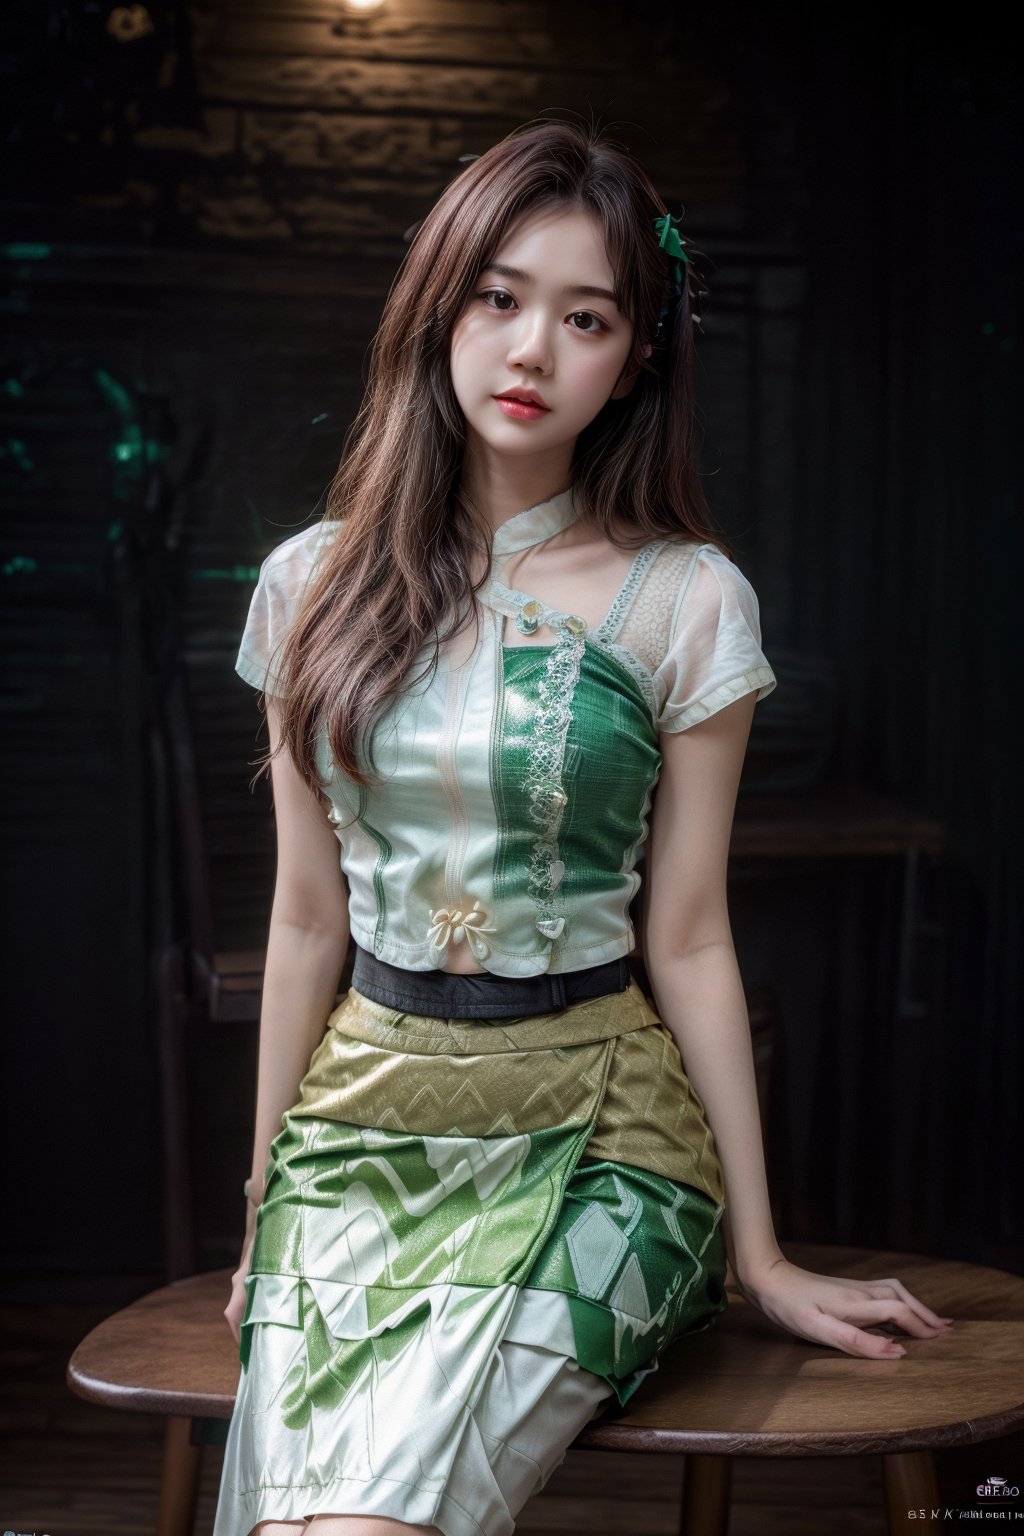 (Best quality, 8k, 32k, Masterpiece, Photorealistic, high contrast, UHD:1.2),(masterpiece, high quality:1.5), (8K, HDR), masterpiece, best quality, 1girl, solo, PrettyLadyxmcc,OrgLadymm,((white_shirt,green_long_skirt,long_skirt)),(pose:random poses),long_skirt,
,acmm ss outfit,wearing acmmsayarma outfit,((background:gradient_darkgreen)),sitting on wood chair